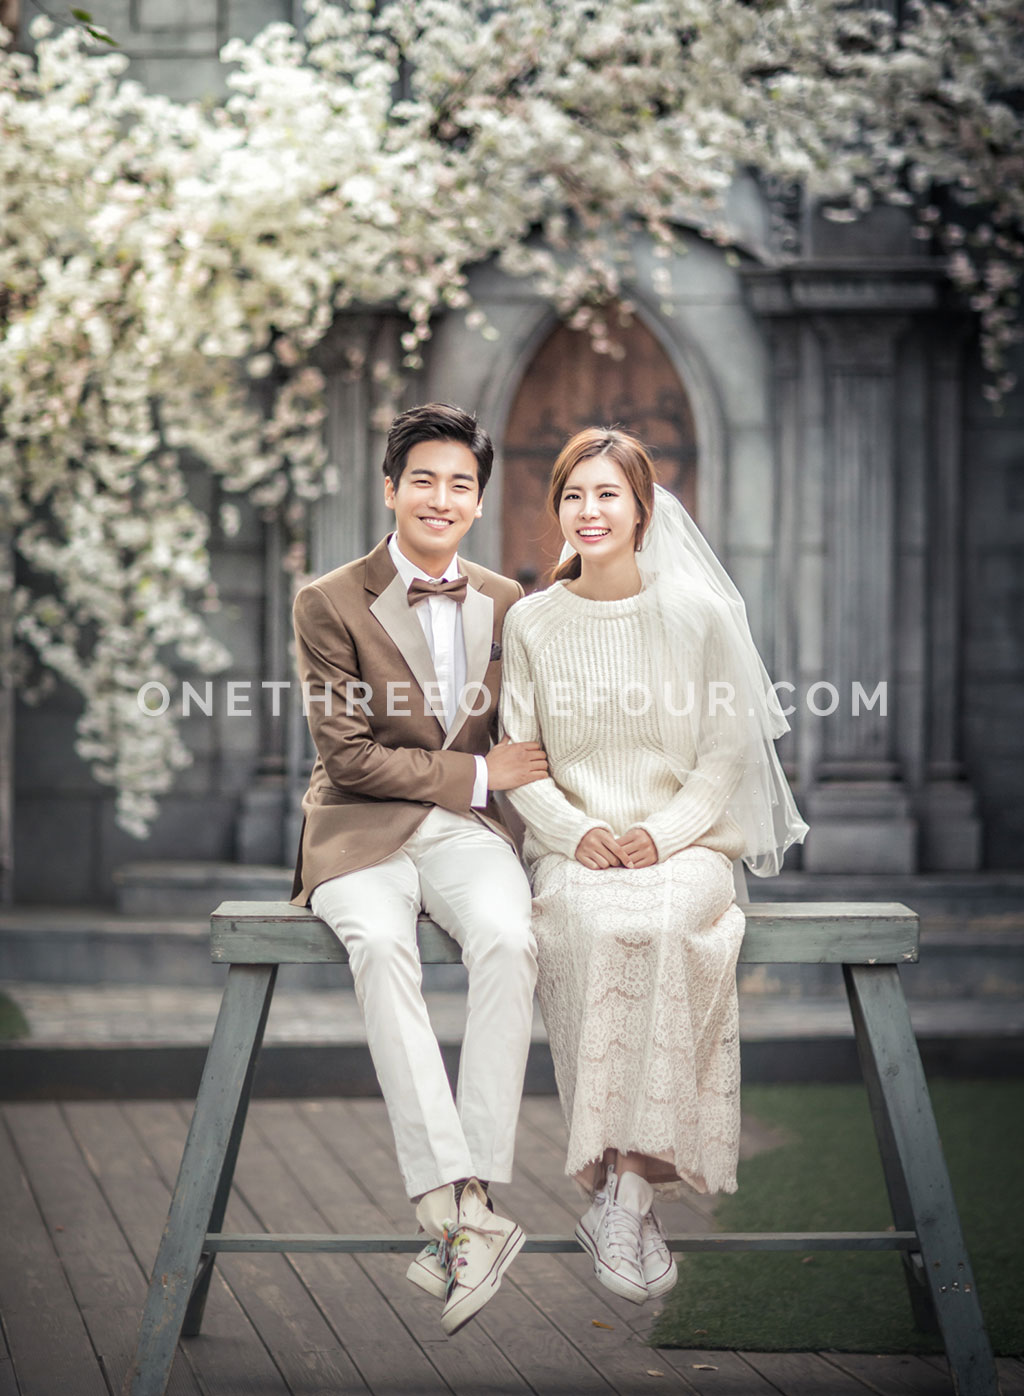 2016 Pre-wedding Photography Sample Part 1 - Small Wedding Concept by Spazio Studio on OneThreeOneFour 0